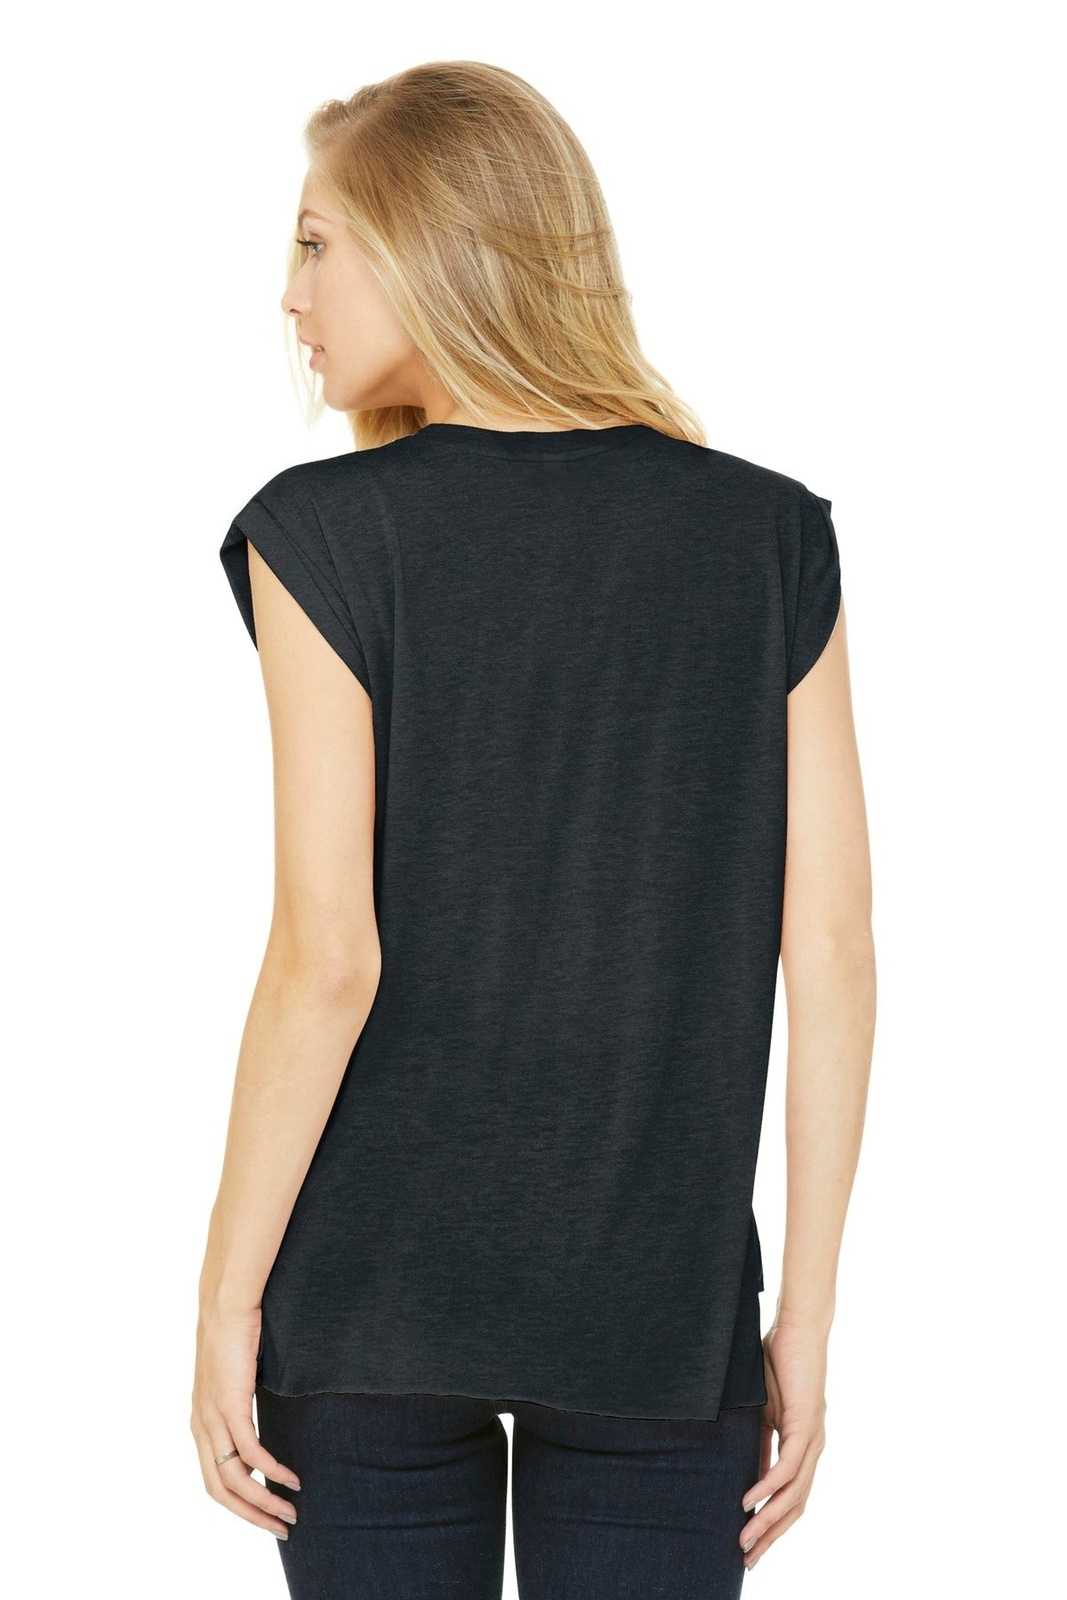 Bella + Canvas 8804 Women's Flowy Muscle Tee with Rolled Cuffs - Dark Gray Heather - HIT a Double